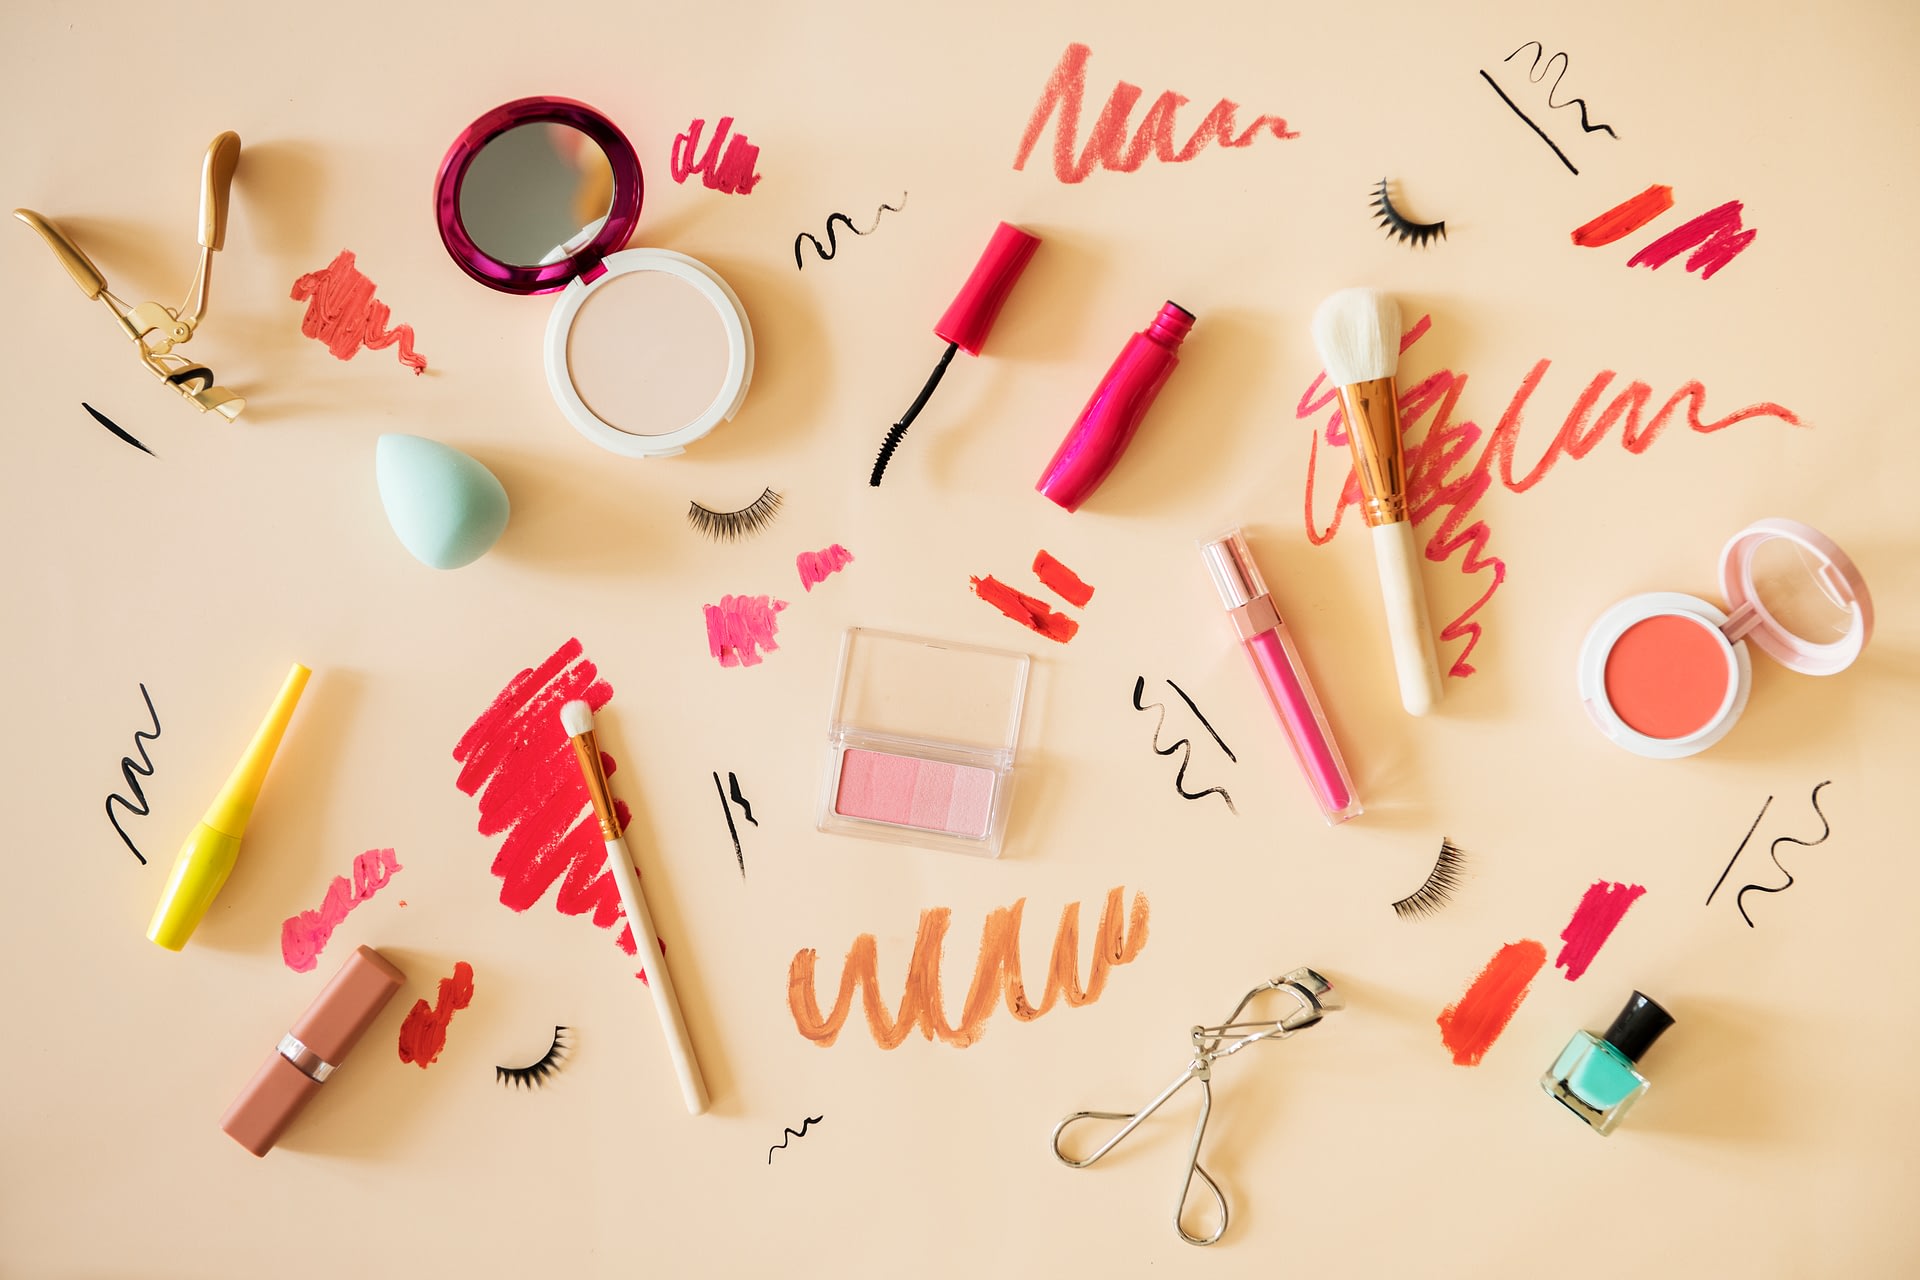 Stylish cosmetics, some of which may contain harmful ingredients